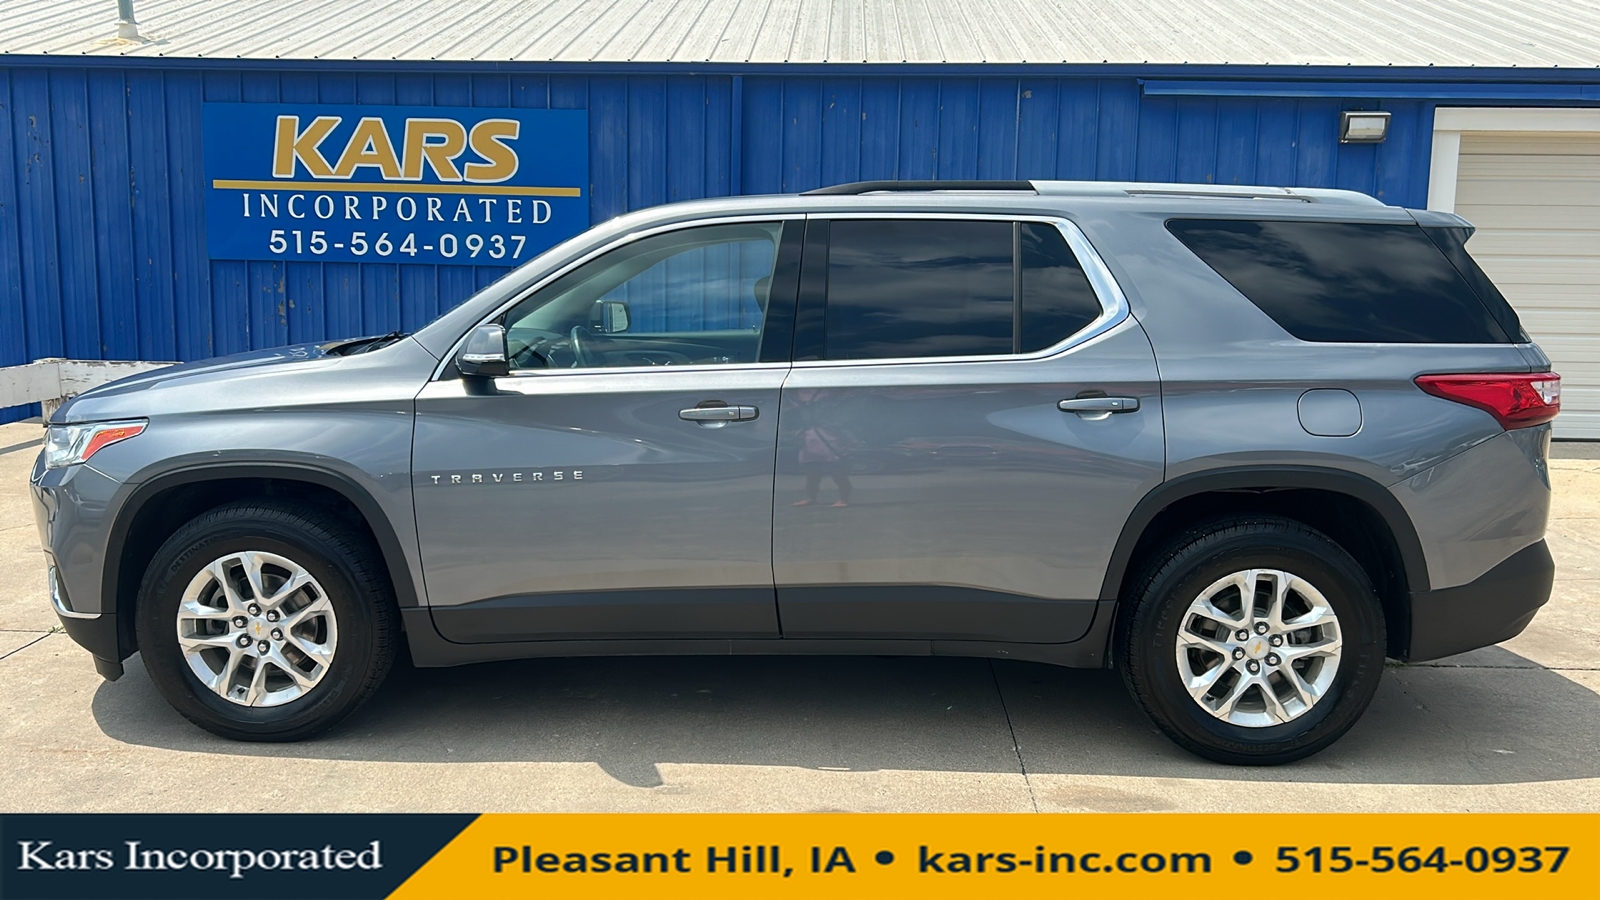 2018 Chevrolet Traverse LT AWD  - W03623P  - Kars Incorporated